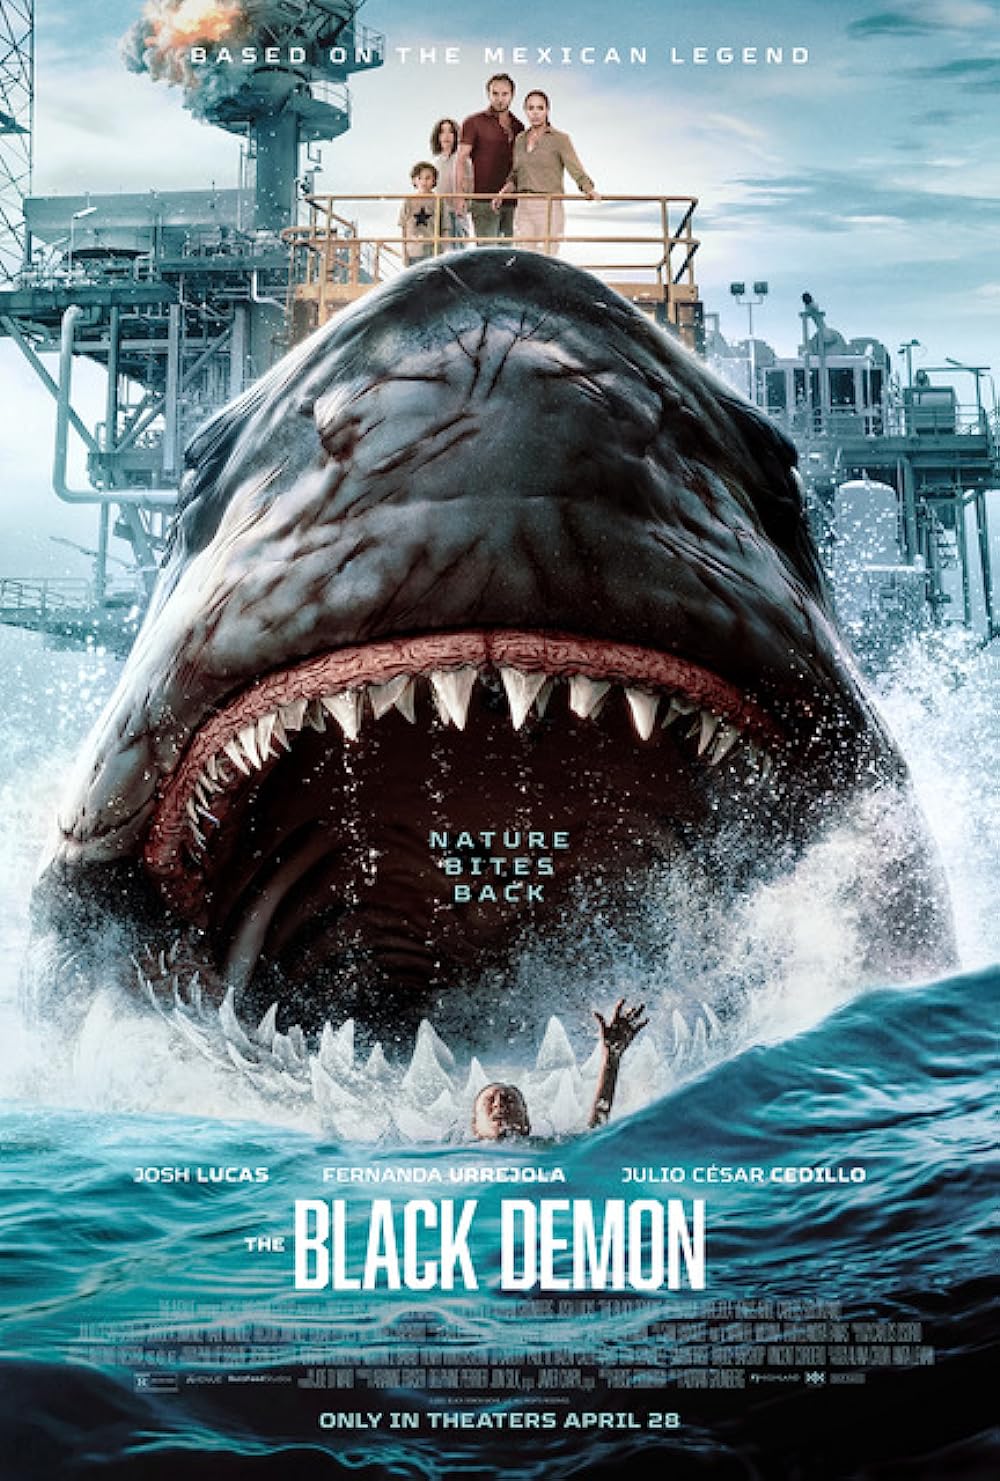 The Black Demon (September 8 - Lionsgate Play)Nixon Oil company inspector Paul Sturges and his family embark on a vacation to an offshore oil rig, El Diamante, near a mysterious Mexican town.